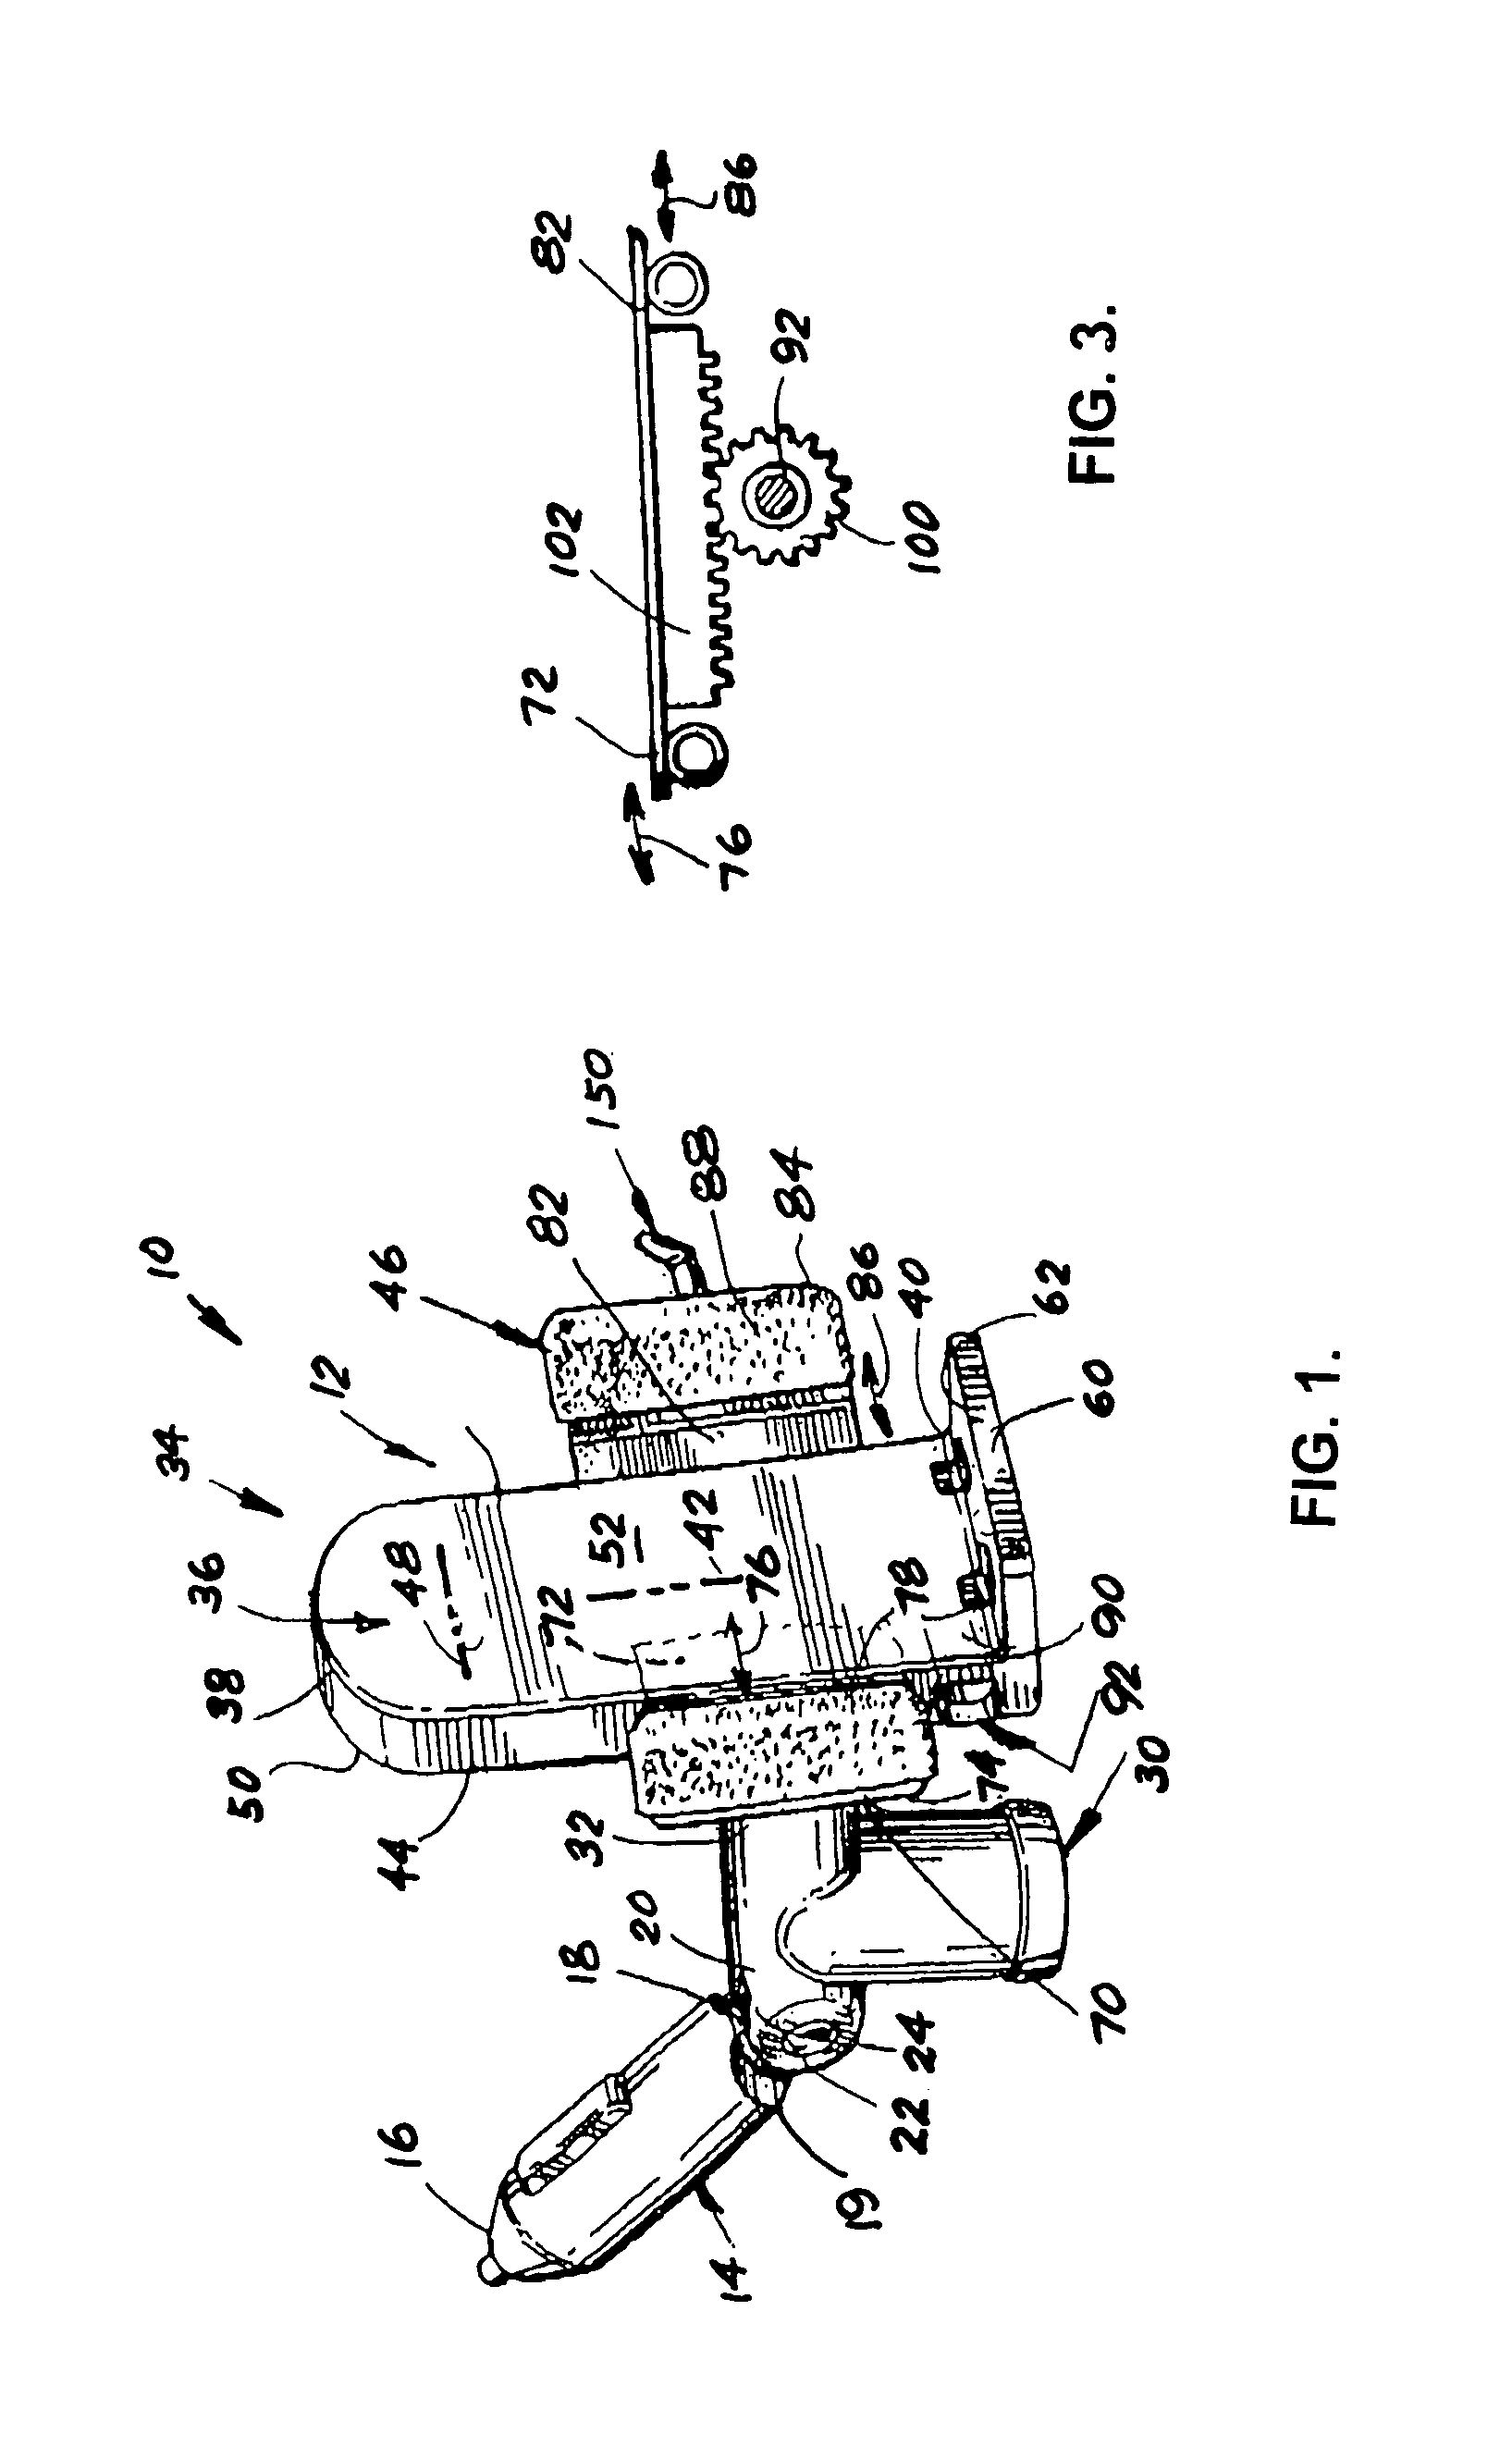 Accessory for supporting a cellular telephone in a motor vehicle